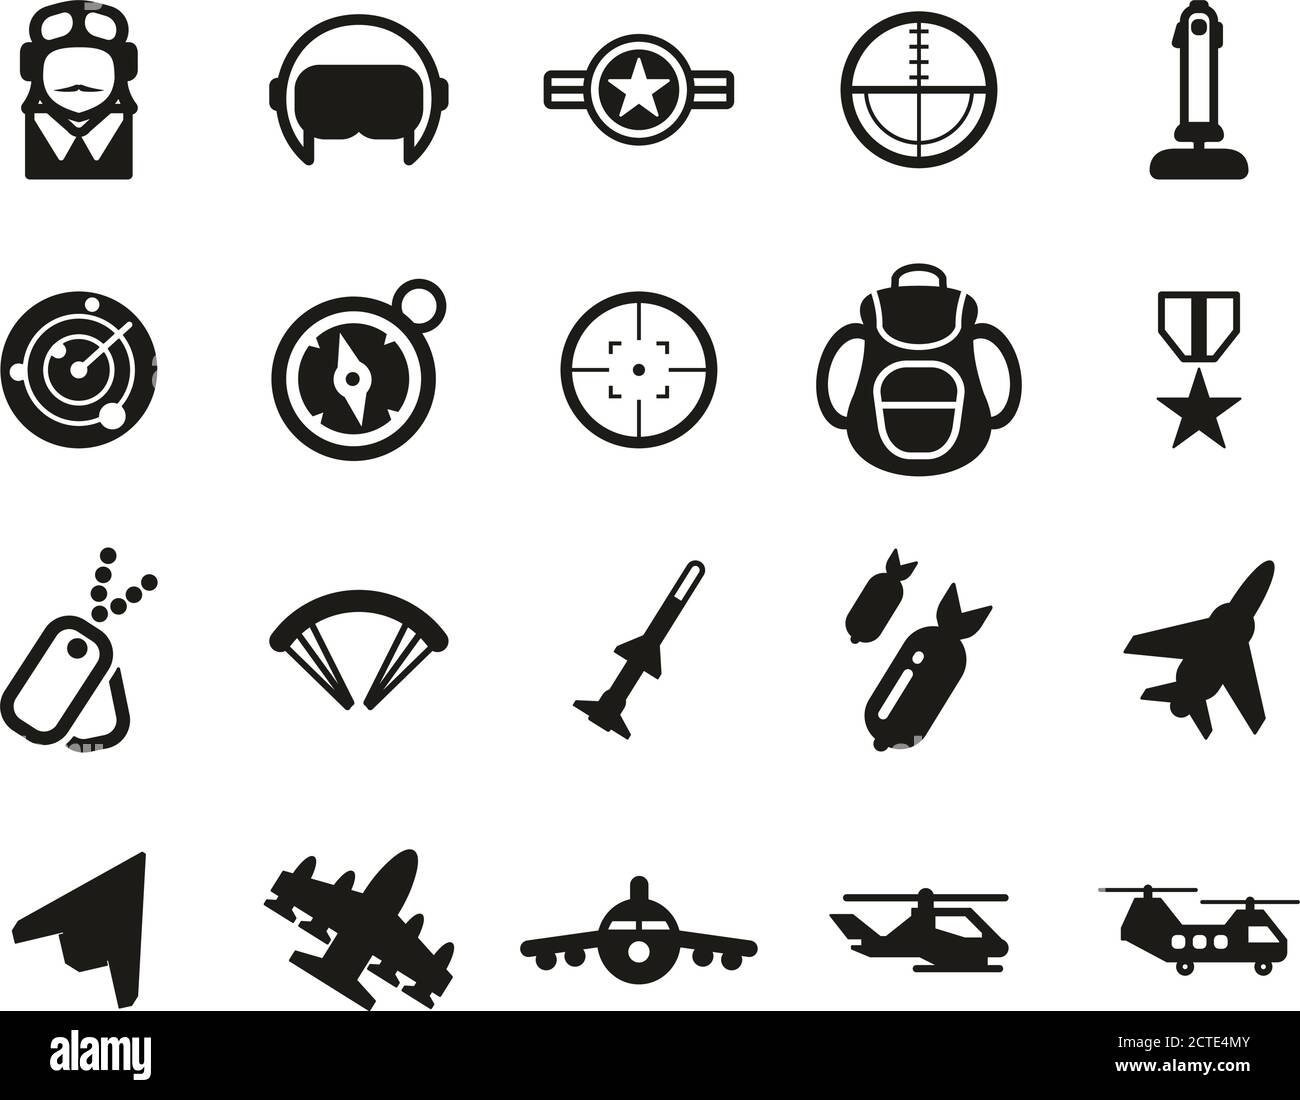 Air Force Icons Black & White Set Big Stock Vector